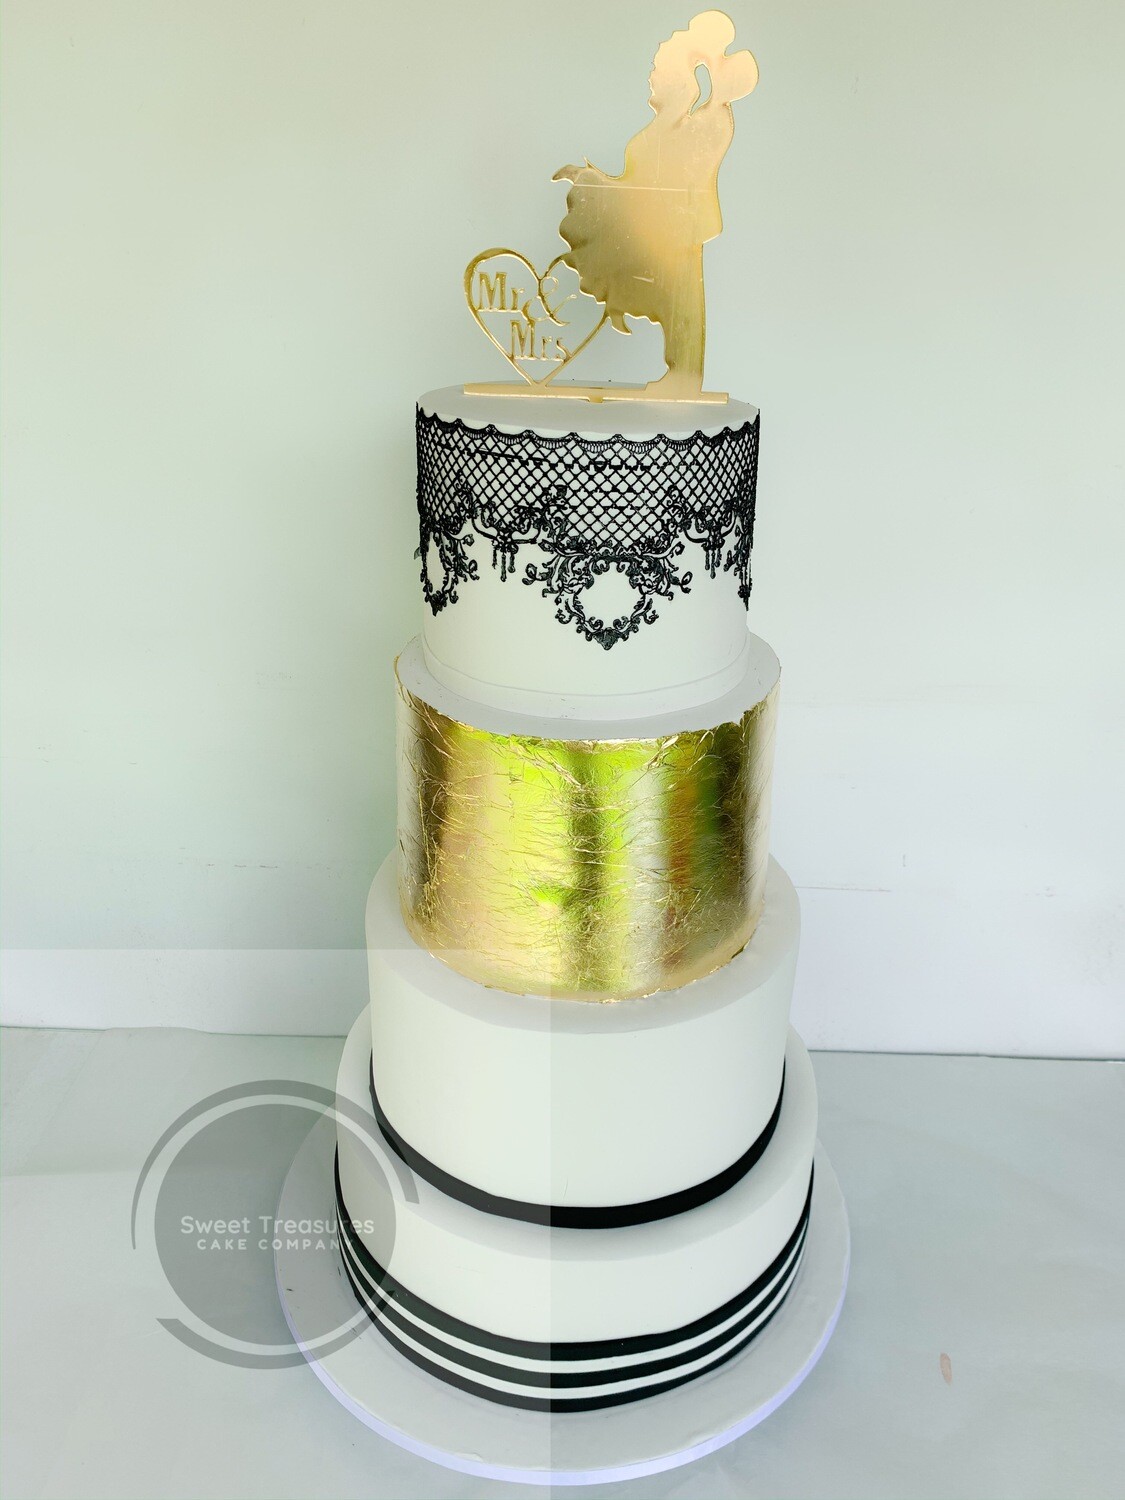 4 tier Black, White and Gold Wedding Cake quotation